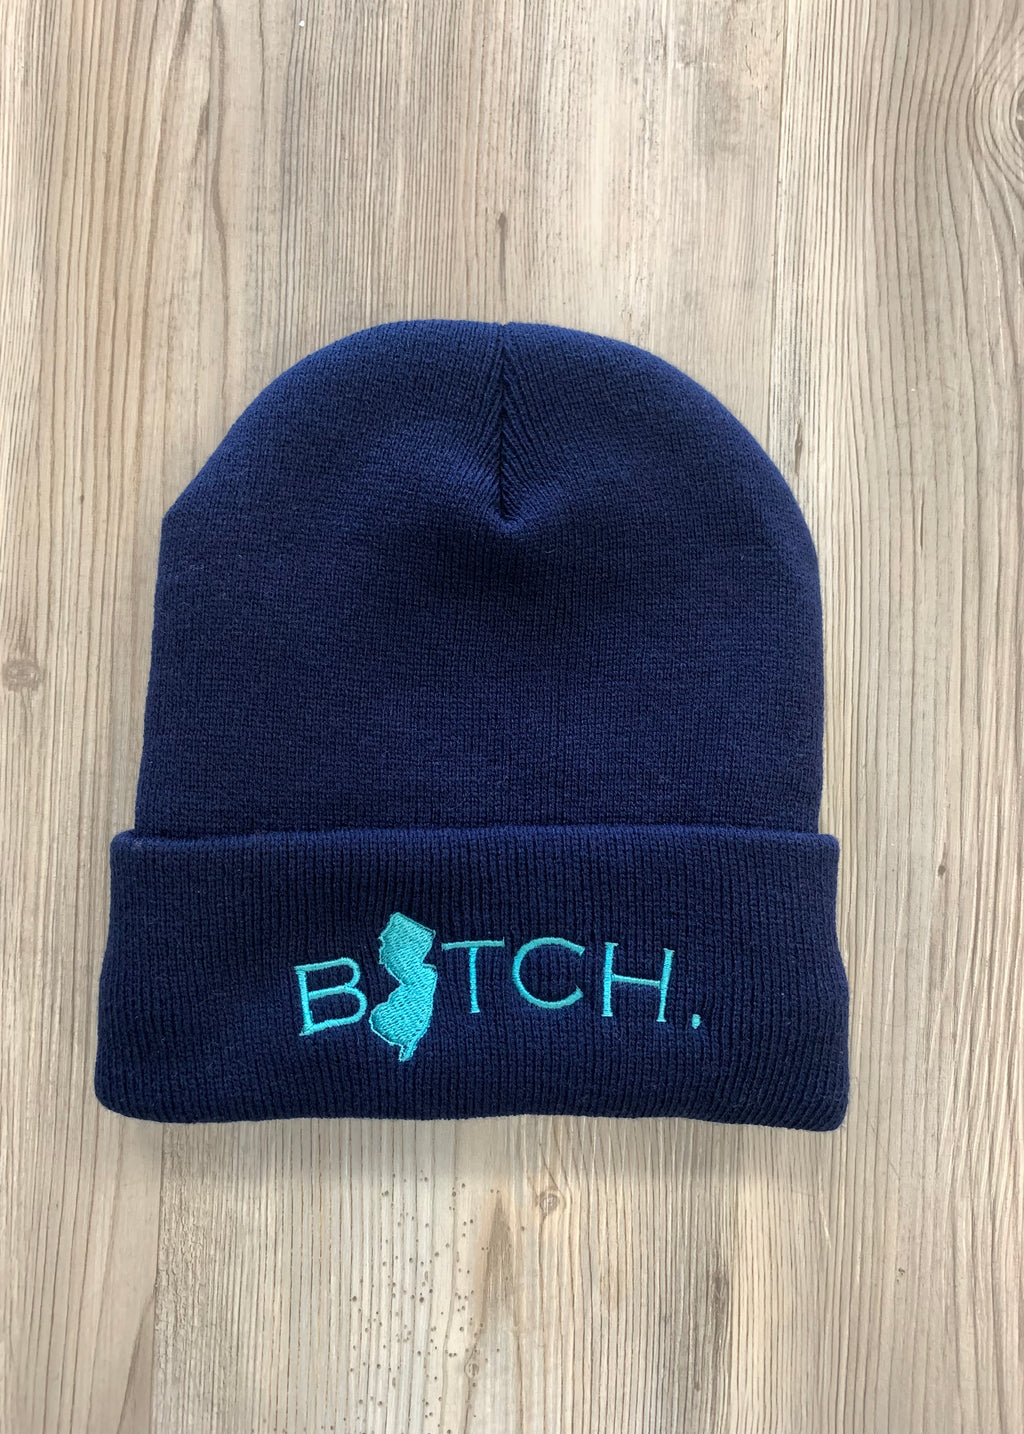 B*TCH Embroidered Beanies